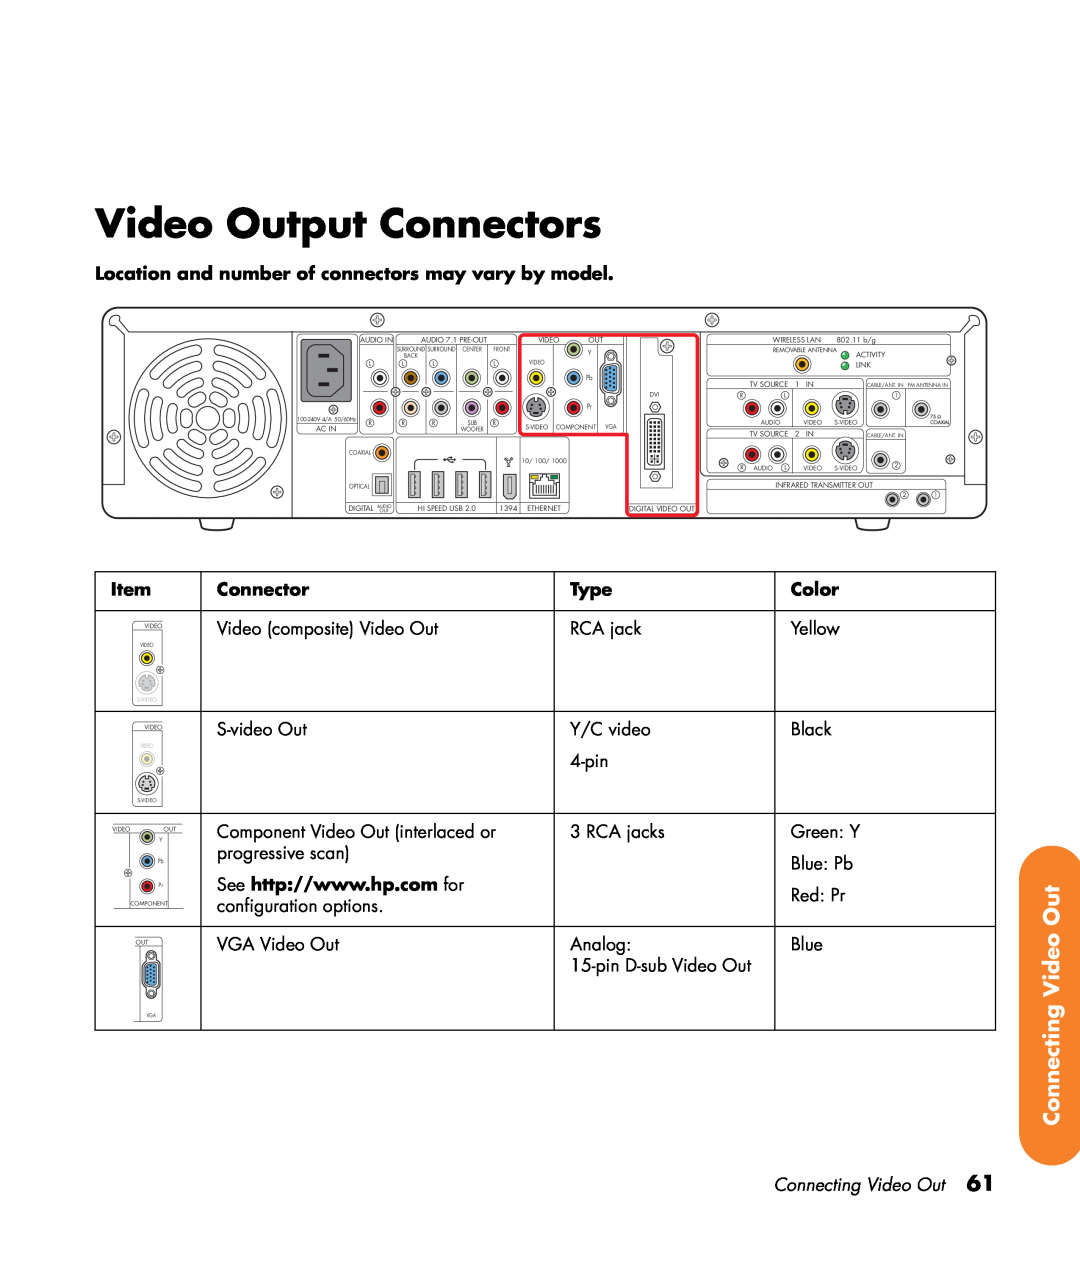 HP z552 Video Output Connectors, Connecting Video Out, Location and number of connectors may vary by model, Type, Color 